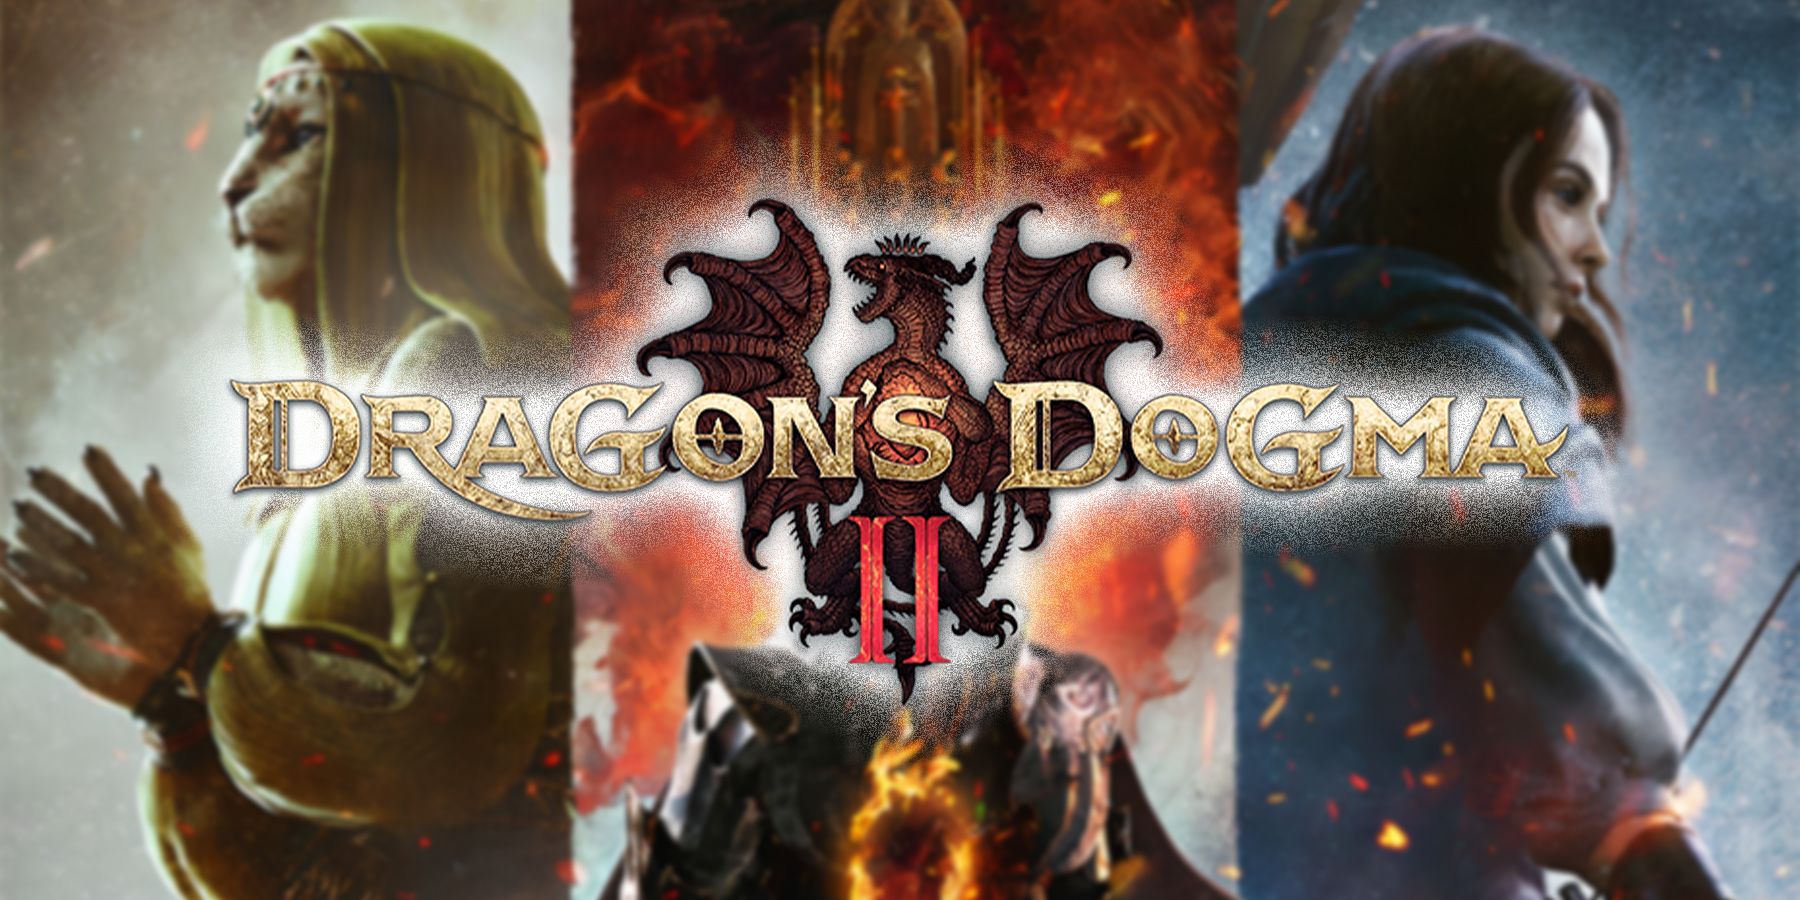 Dragon's Dogma 2 key art with logo in front of it